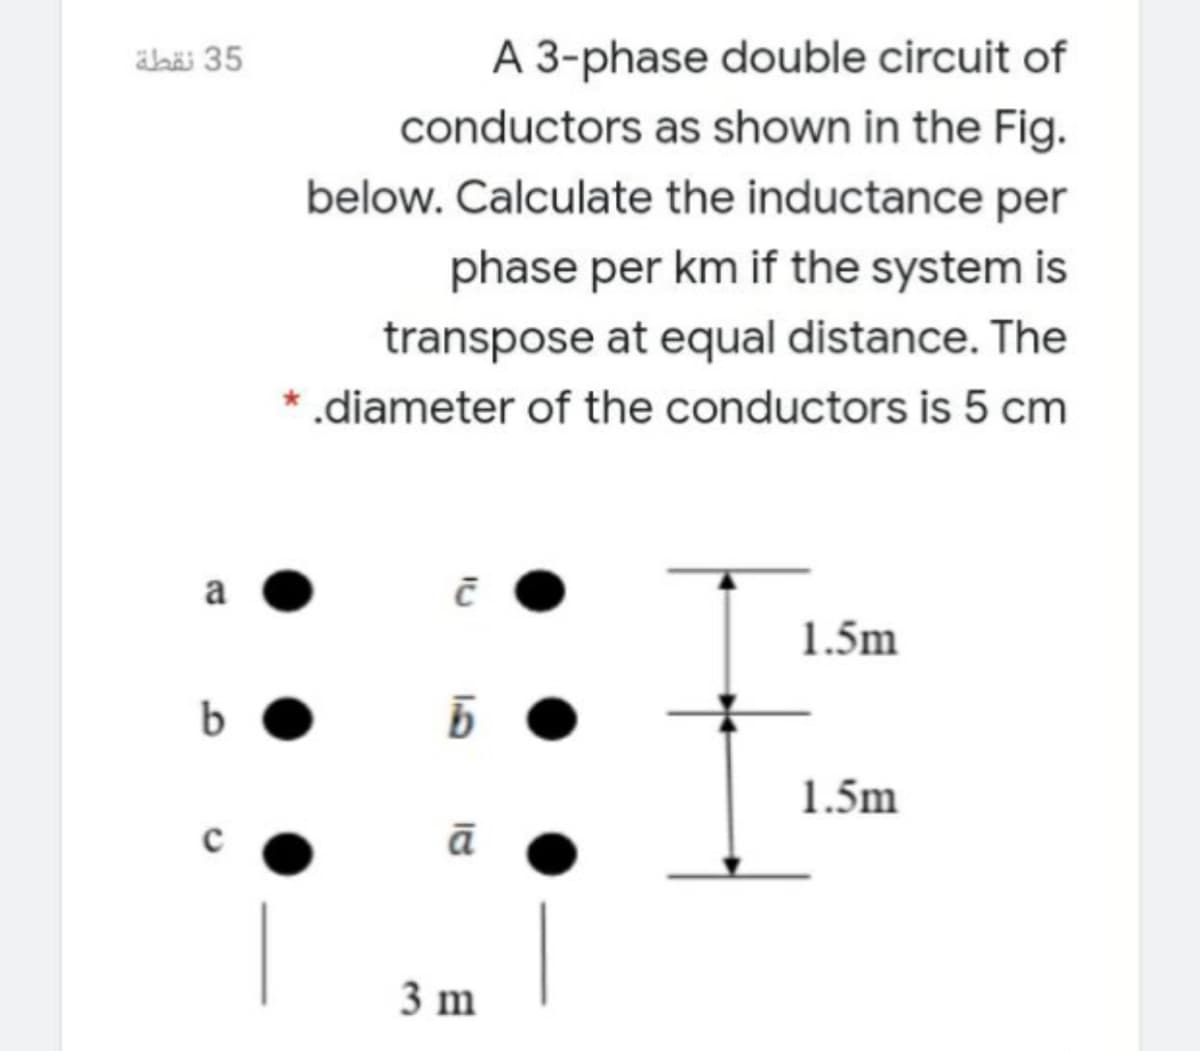 äbäi 35
A 3-phase double circuit of
conductors as shown in the Fig.
below. Calculate the inductance per
phase per km if the system is
transpose at equal distance. The
* .diameter of the conductors is 5 cm
a
1.5m
1.5m
ā
3 m
13
